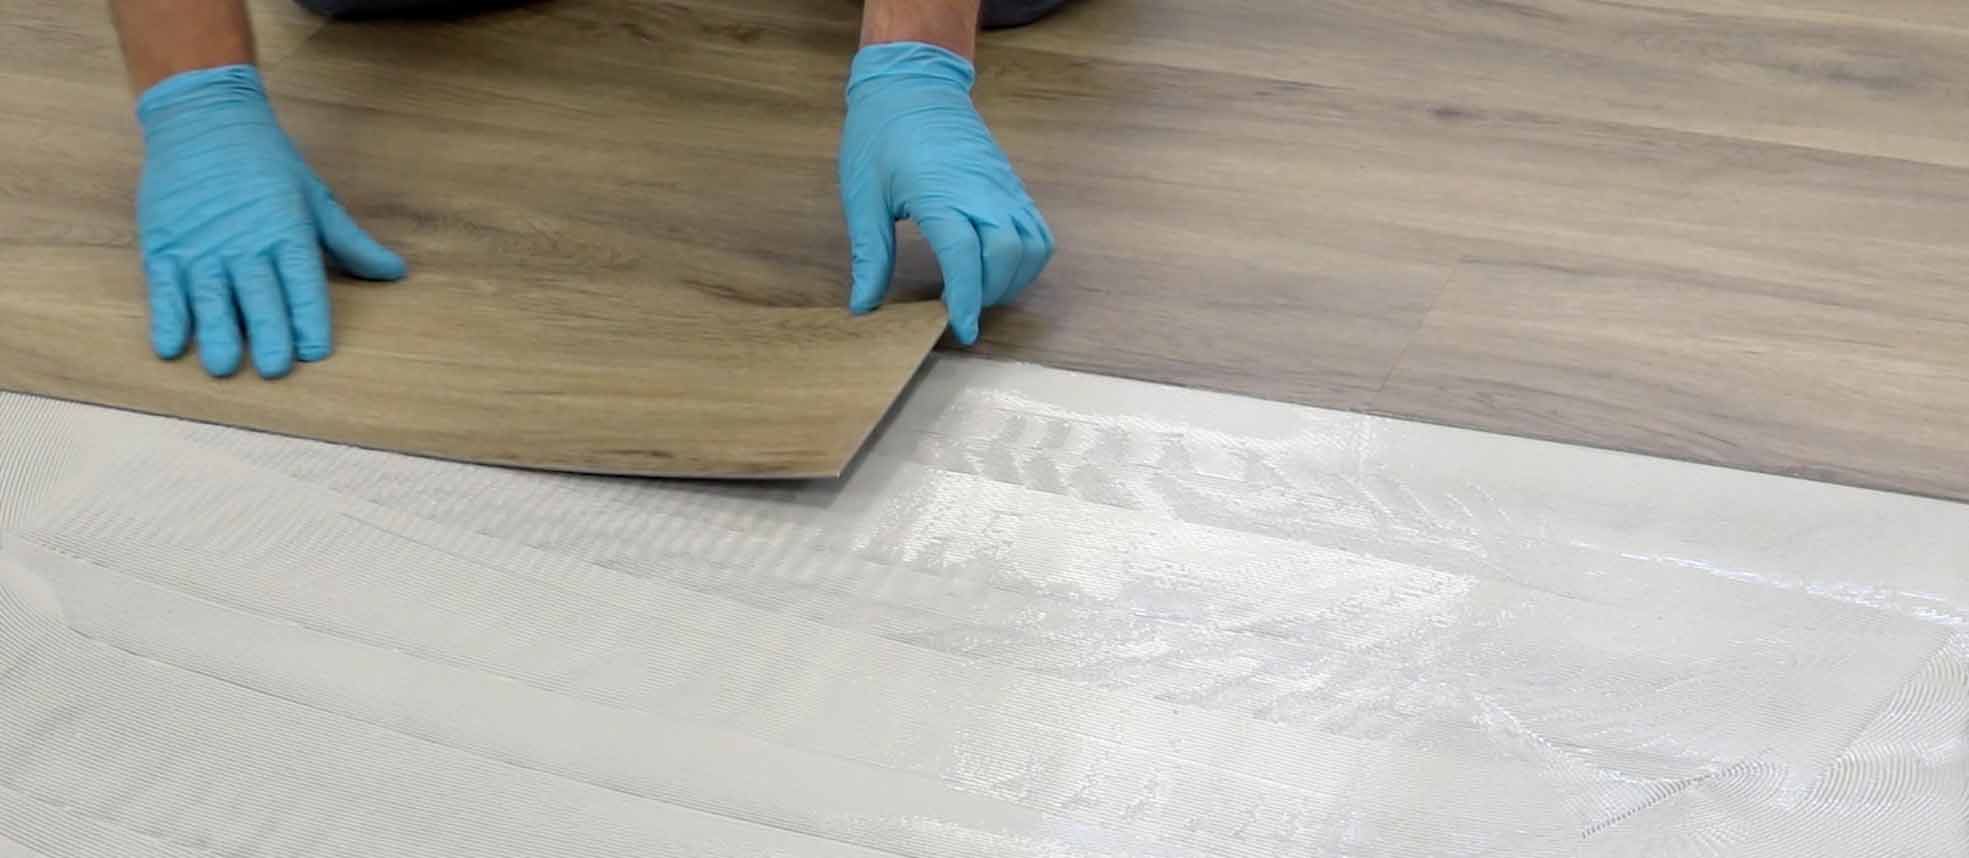 Floor adhesive for LVT